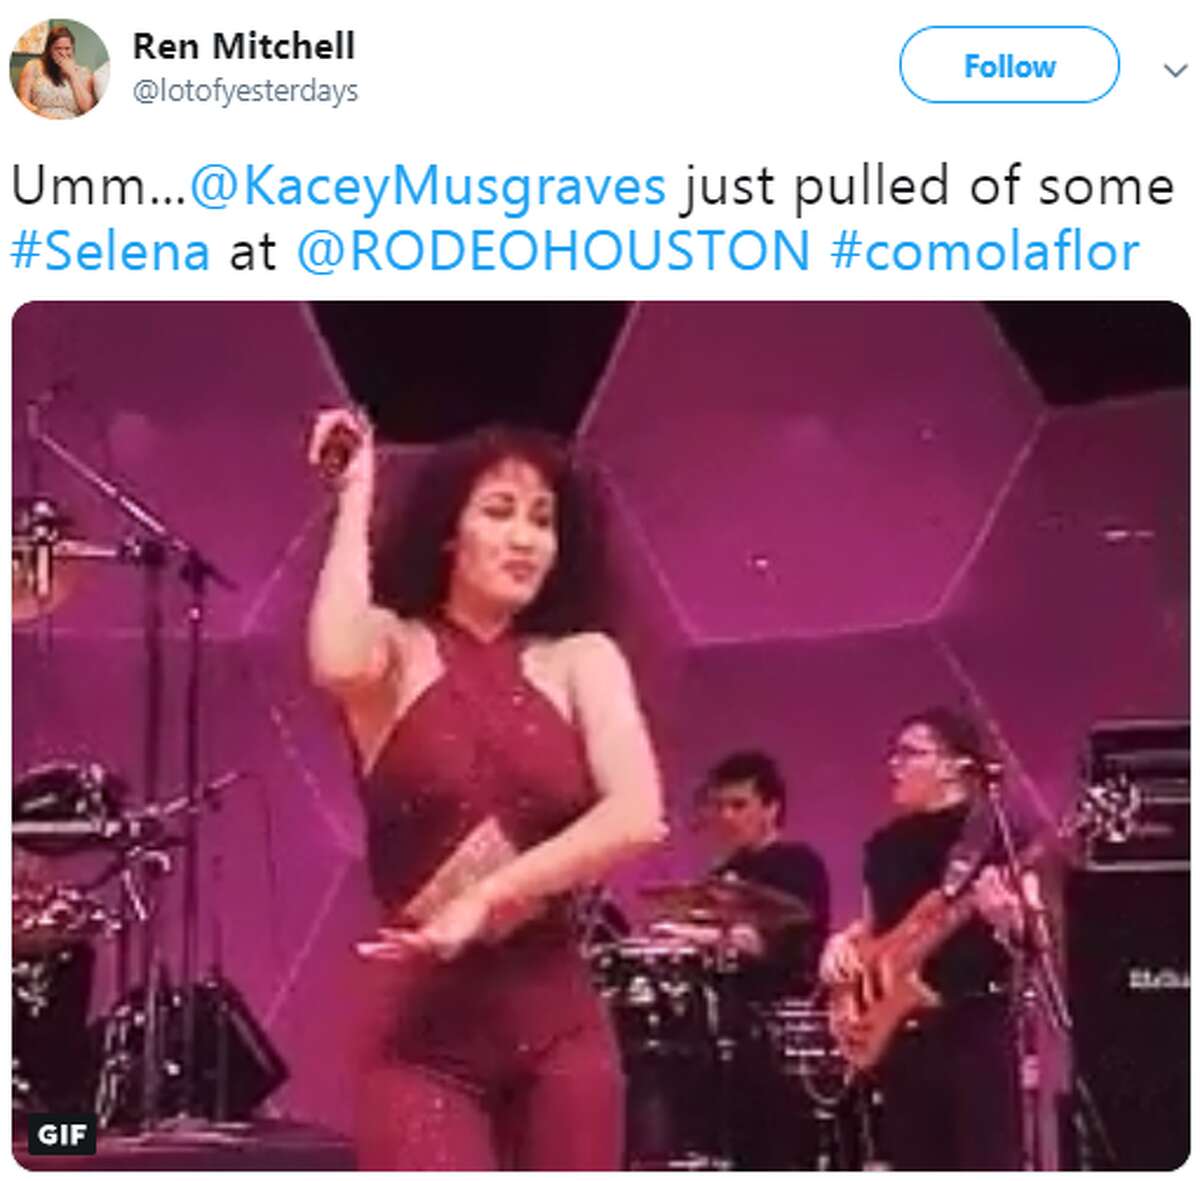 Twitter reacts to Grammy Award-winner Kacey Musgraves covering "Como La Flor" by Selena.